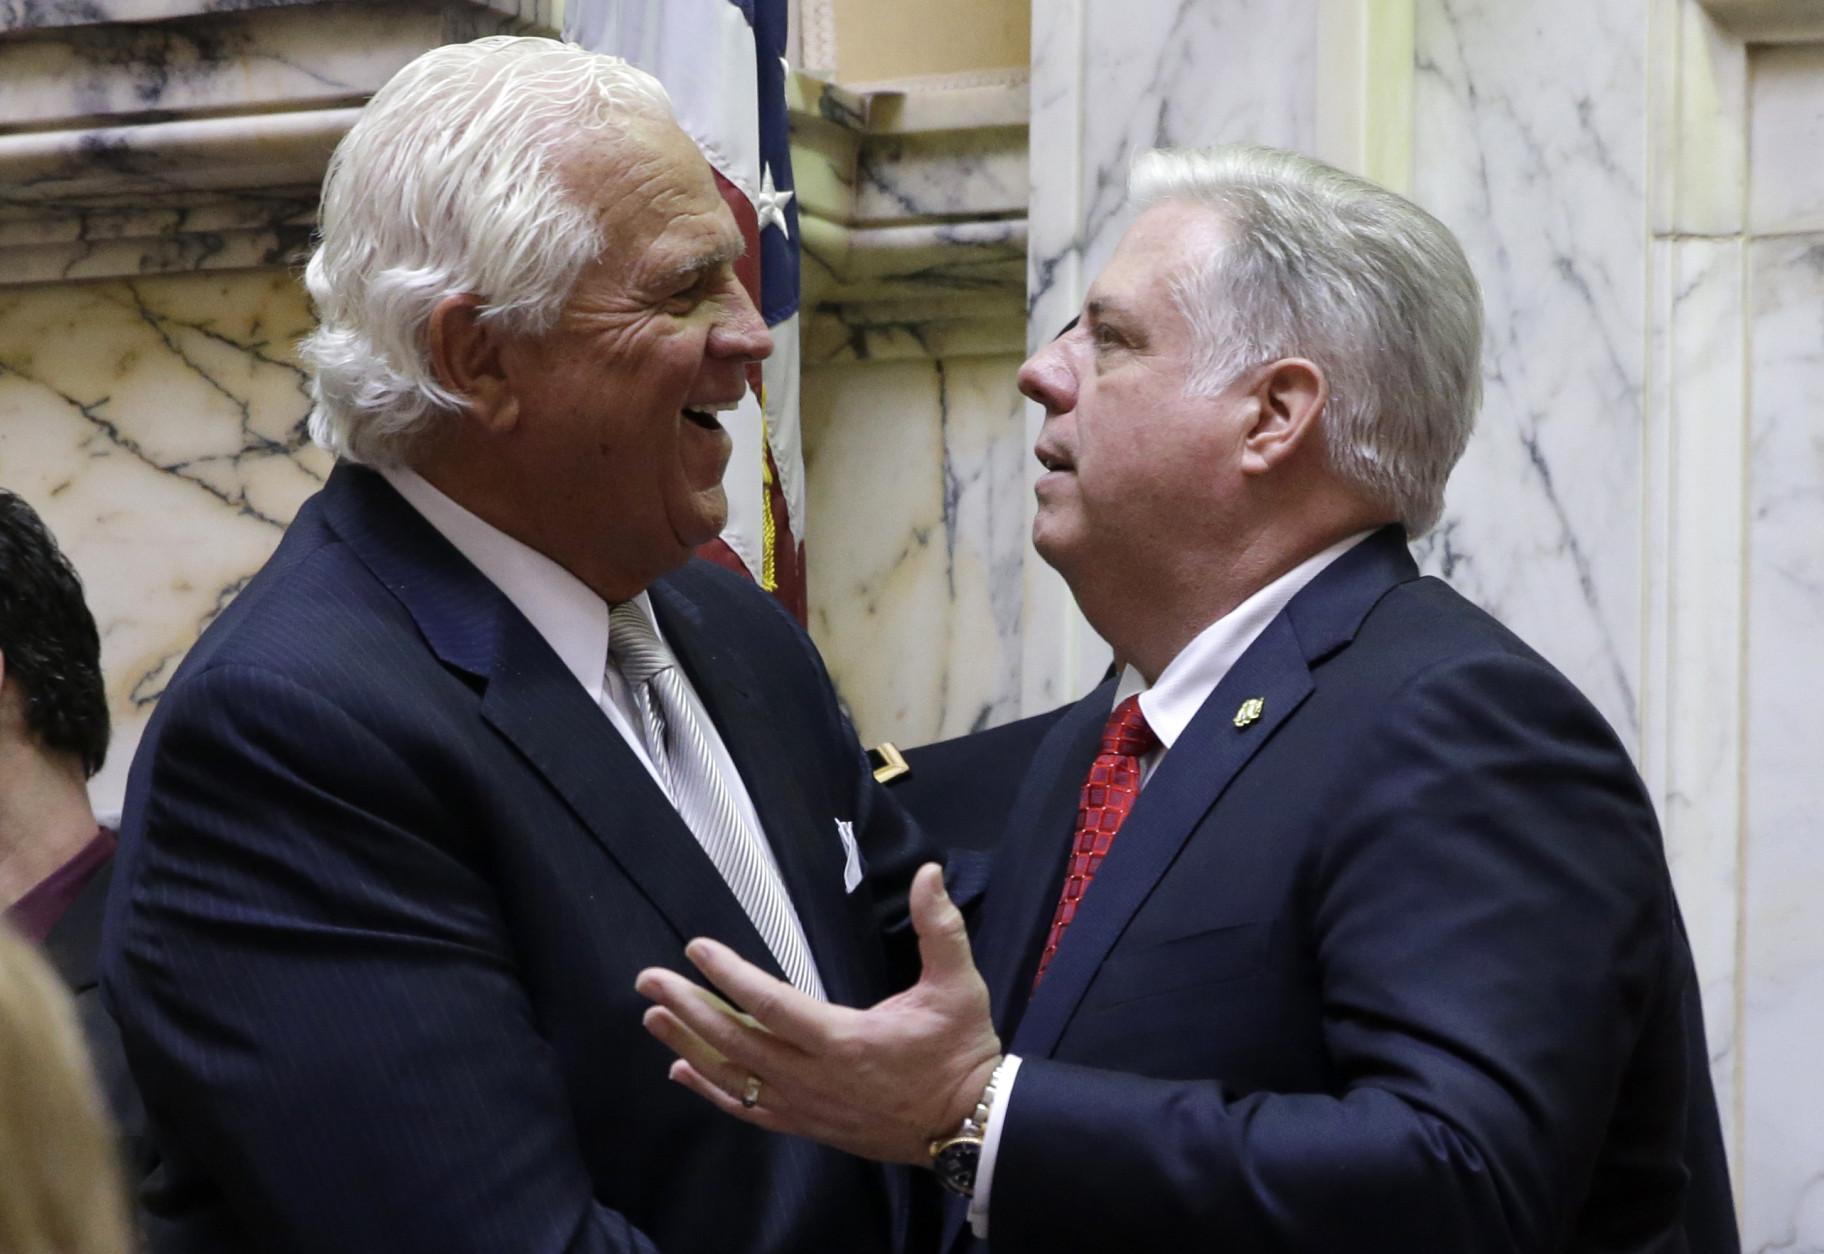 Both Maryland and Virginia are looking for ways to combat the rising heroin problem. 
Larry Hogan, right, is seen here speaking with Senate President Thomas V. Mike Miller  in Annapolis, Md. (AP Photo/Patrick Semansky, Pool)